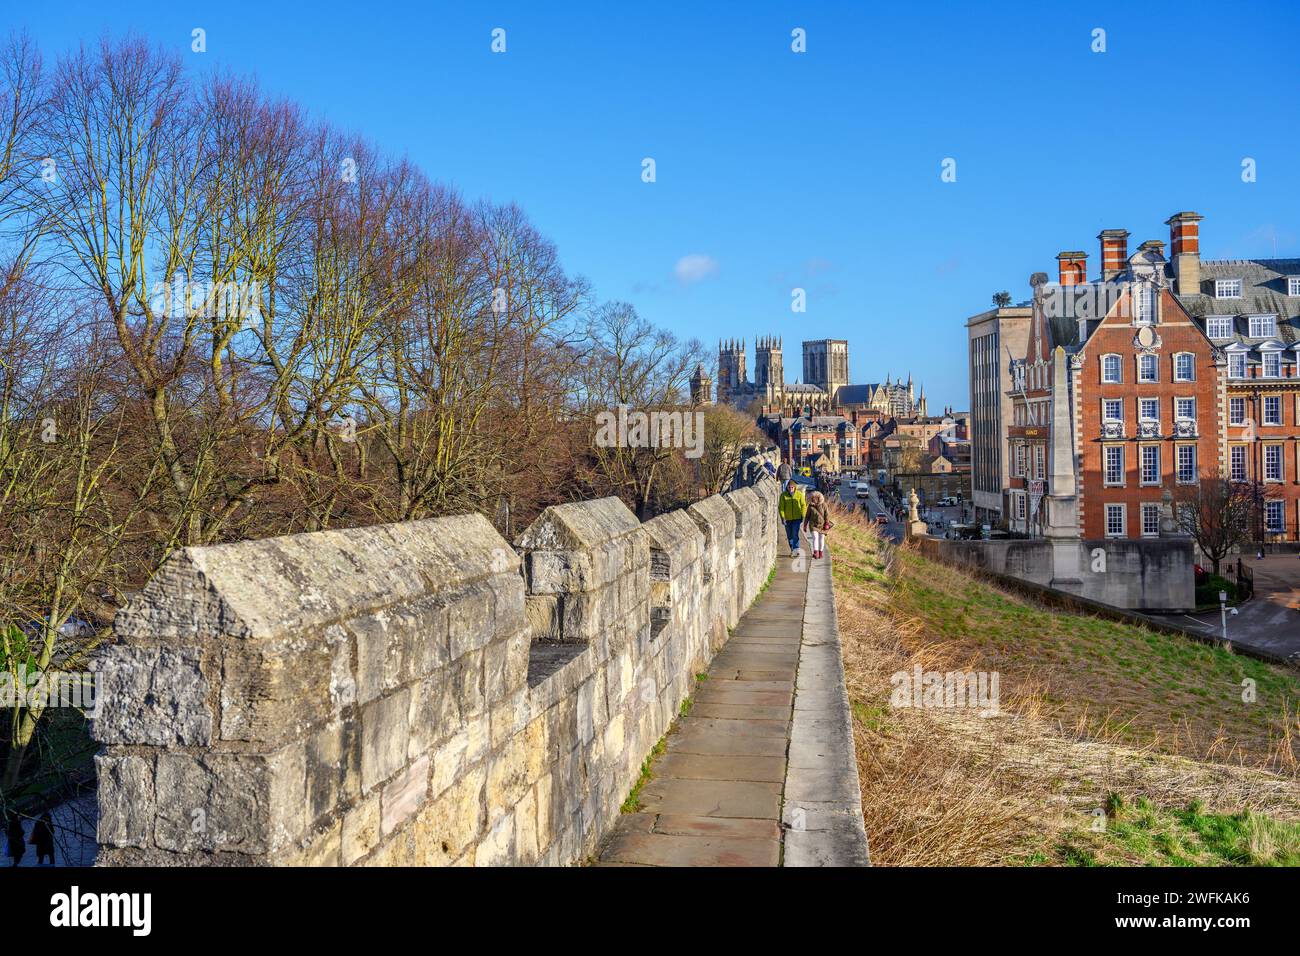 The City Wall Walk looking towards York Minster, with The Grand Hotel on the right, York, England, UK. Stock Photo